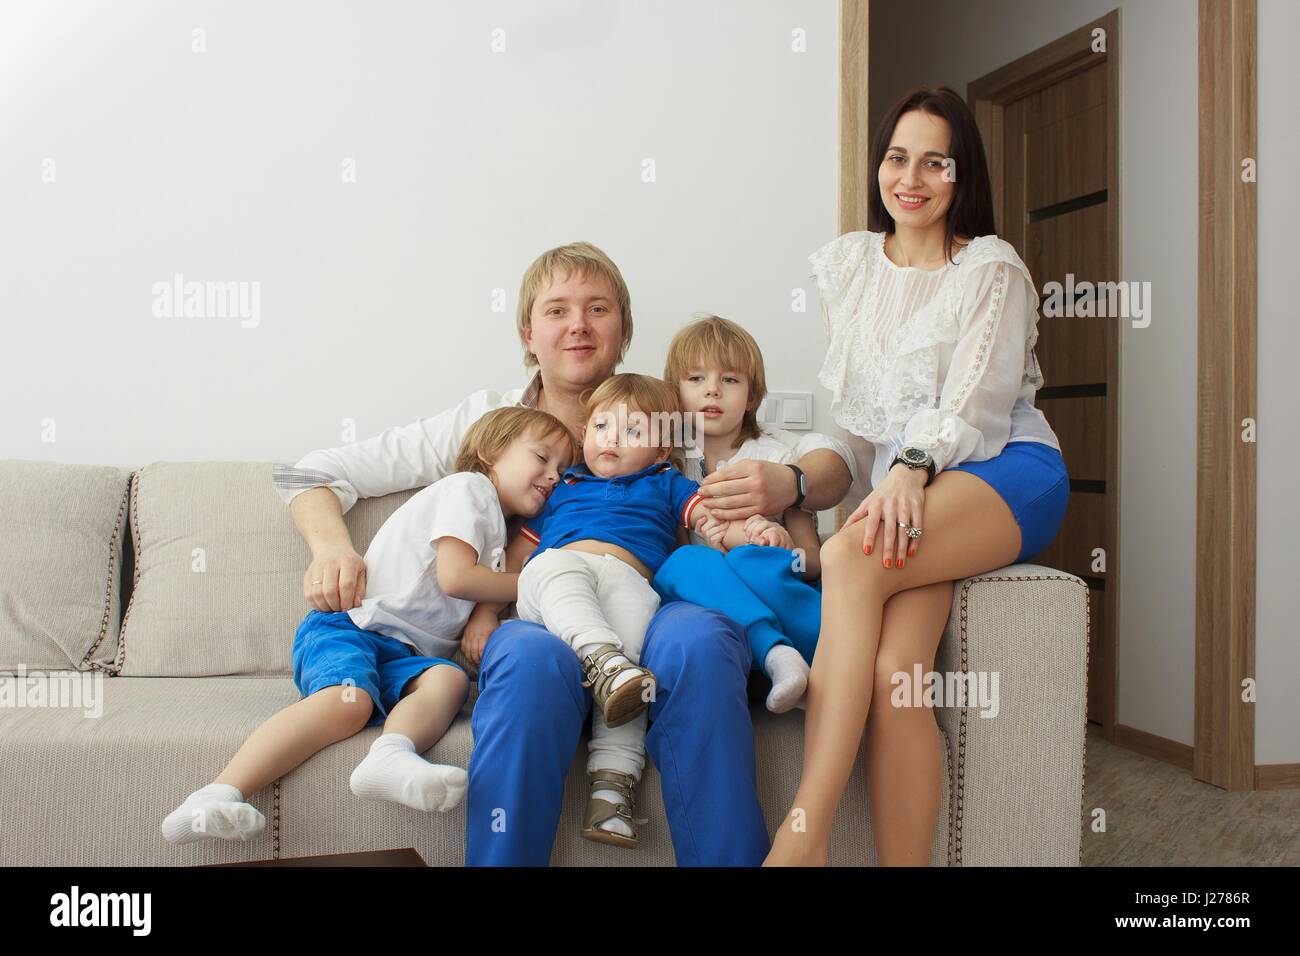 Family relaxing on sofa Banque D'Images